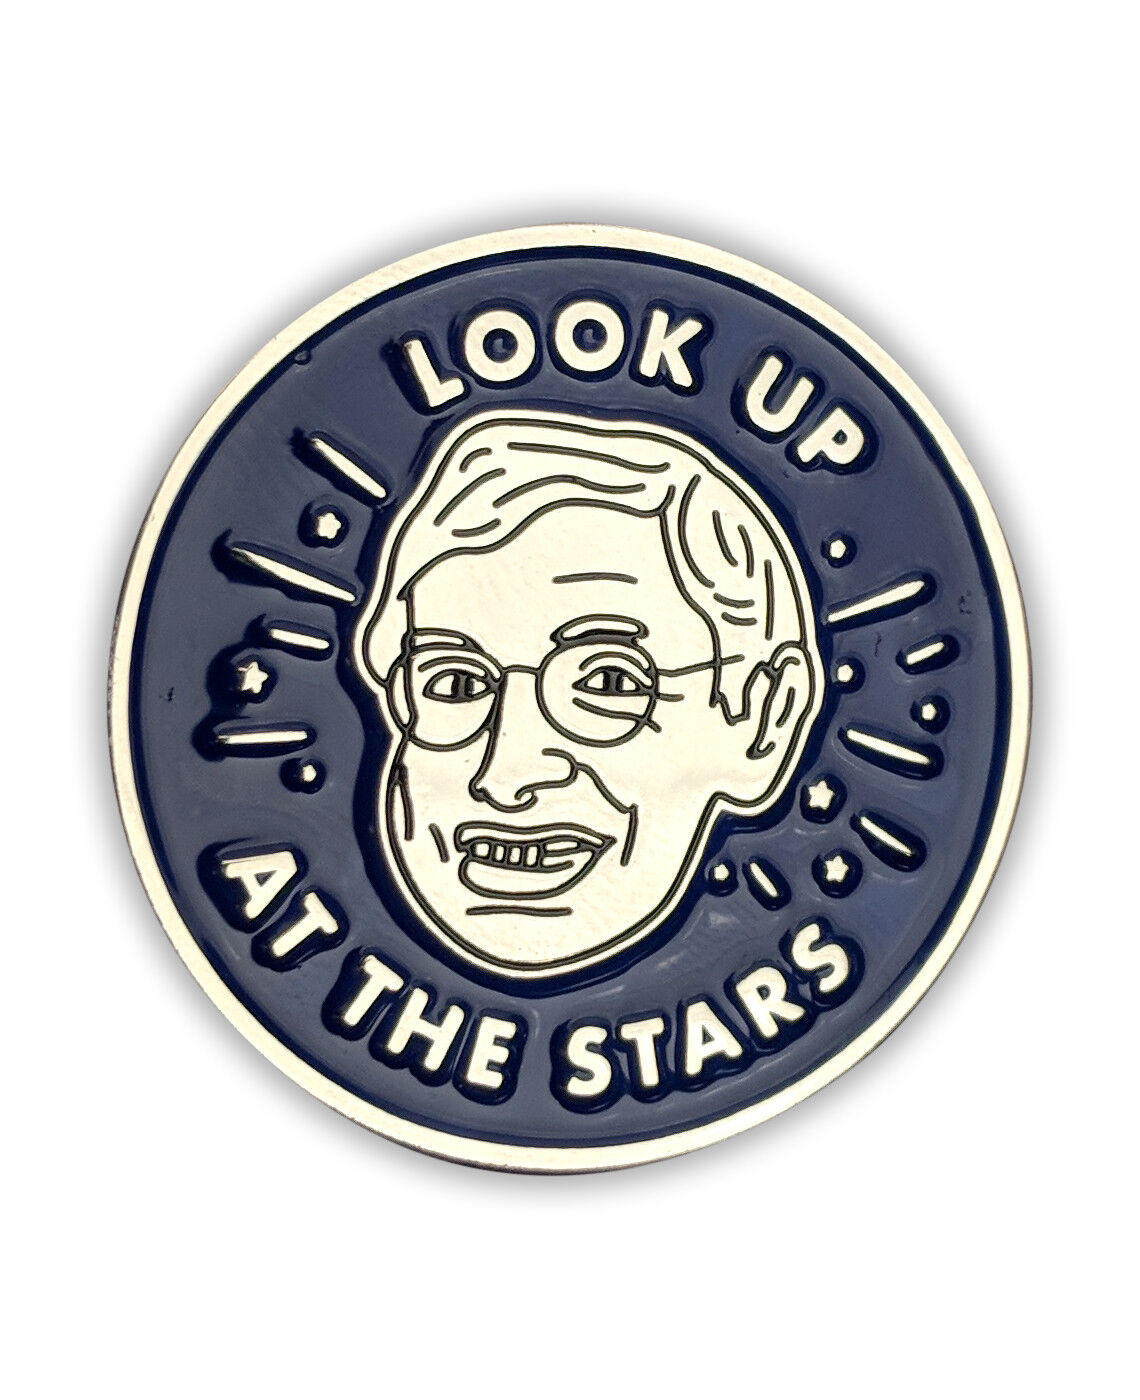 Stephen Hawking Enamel Pin, button, science, cosmos, brief history of time,ALS